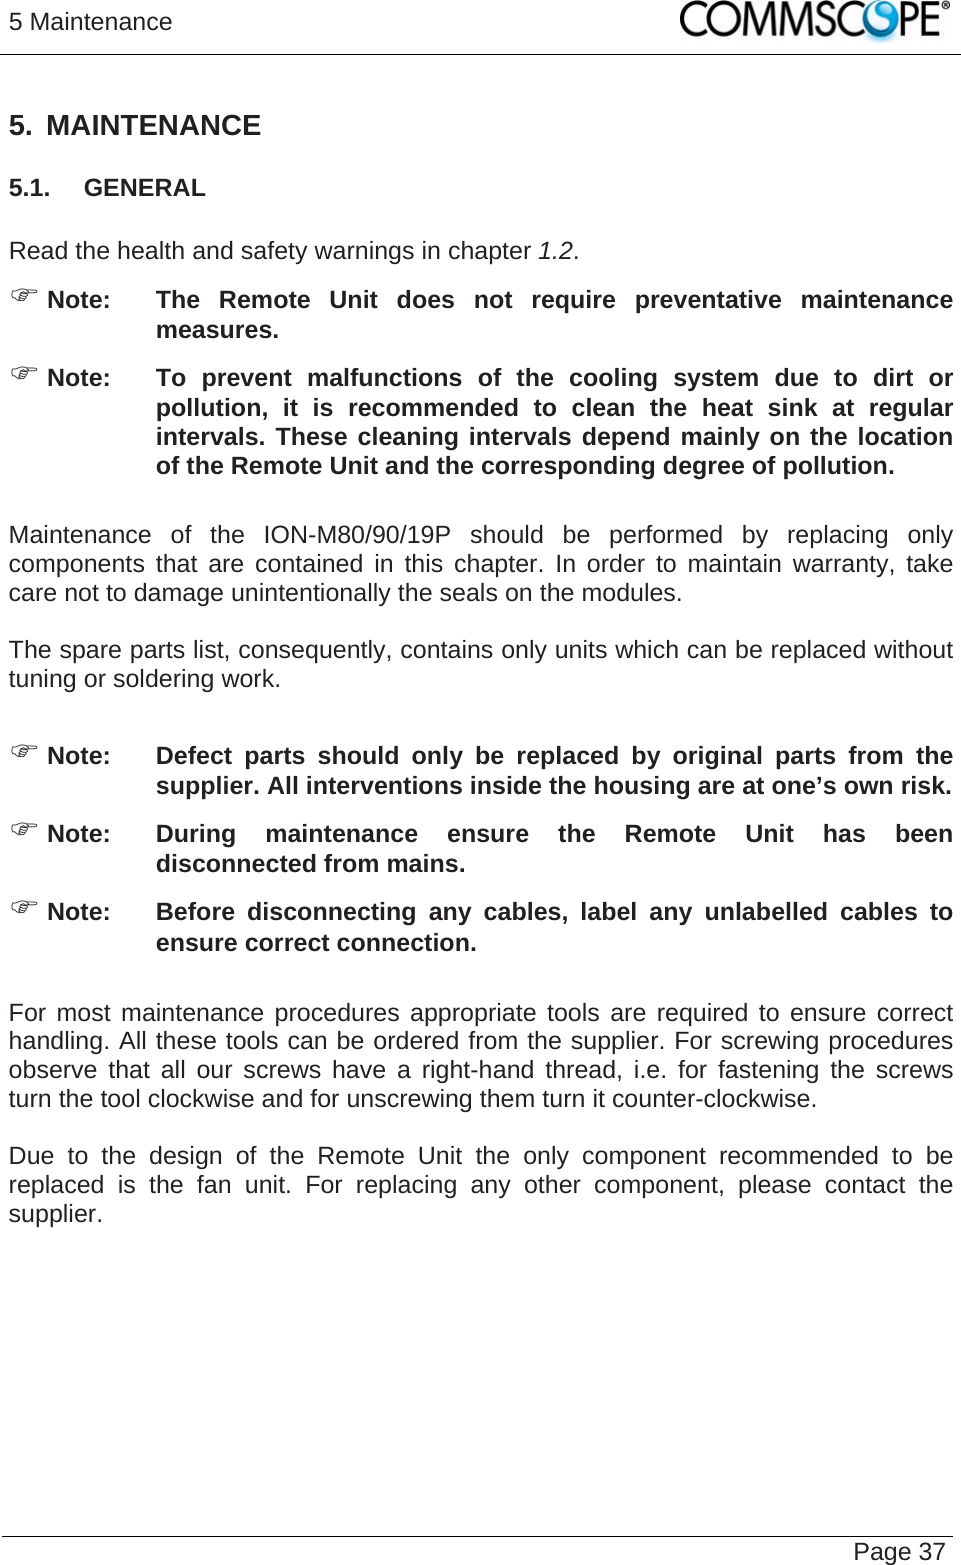 5 Maintenance   Page 37 5. MAINTENANCE 5.1.  GENERAL  Read the health and safety warnings in chapter 1.2. ) Note:  The Remote Unit does not require preventative maintenance measures. ) Note:  To prevent malfunctions of the cooling system due to dirt or pollution, it is recommended to clean the heat sink at regular intervals. These cleaning intervals depend mainly on the location of the Remote Unit and the corresponding degree of pollution.  Maintenance of the ION-M80/90/19P should be performed by replacing only components that are contained in this chapter. In order to maintain warranty, take care not to damage unintentionally the seals on the modules.  The spare parts list, consequently, contains only units which can be replaced without tuning or soldering work.  ) Note:  Defect parts should only be replaced by original parts from the supplier. All interventions inside the housing are at one’s own risk. ) Note:  During maintenance ensure the Remote Unit has been disconnected from mains. ) Note:  Before disconnecting any cables, label any unlabelled cables to ensure correct connection.  For most maintenance procedures appropriate tools are required to ensure correct handling. All these tools can be ordered from the supplier. For screwing procedures observe that all our screws have a right-hand thread, i.e. for fastening the screws turn the tool clockwise and for unscrewing them turn it counter-clockwise.  Due to the design of the Remote Unit the only component recommended to be replaced is the fan unit. For replacing any other component, please contact the supplier.  